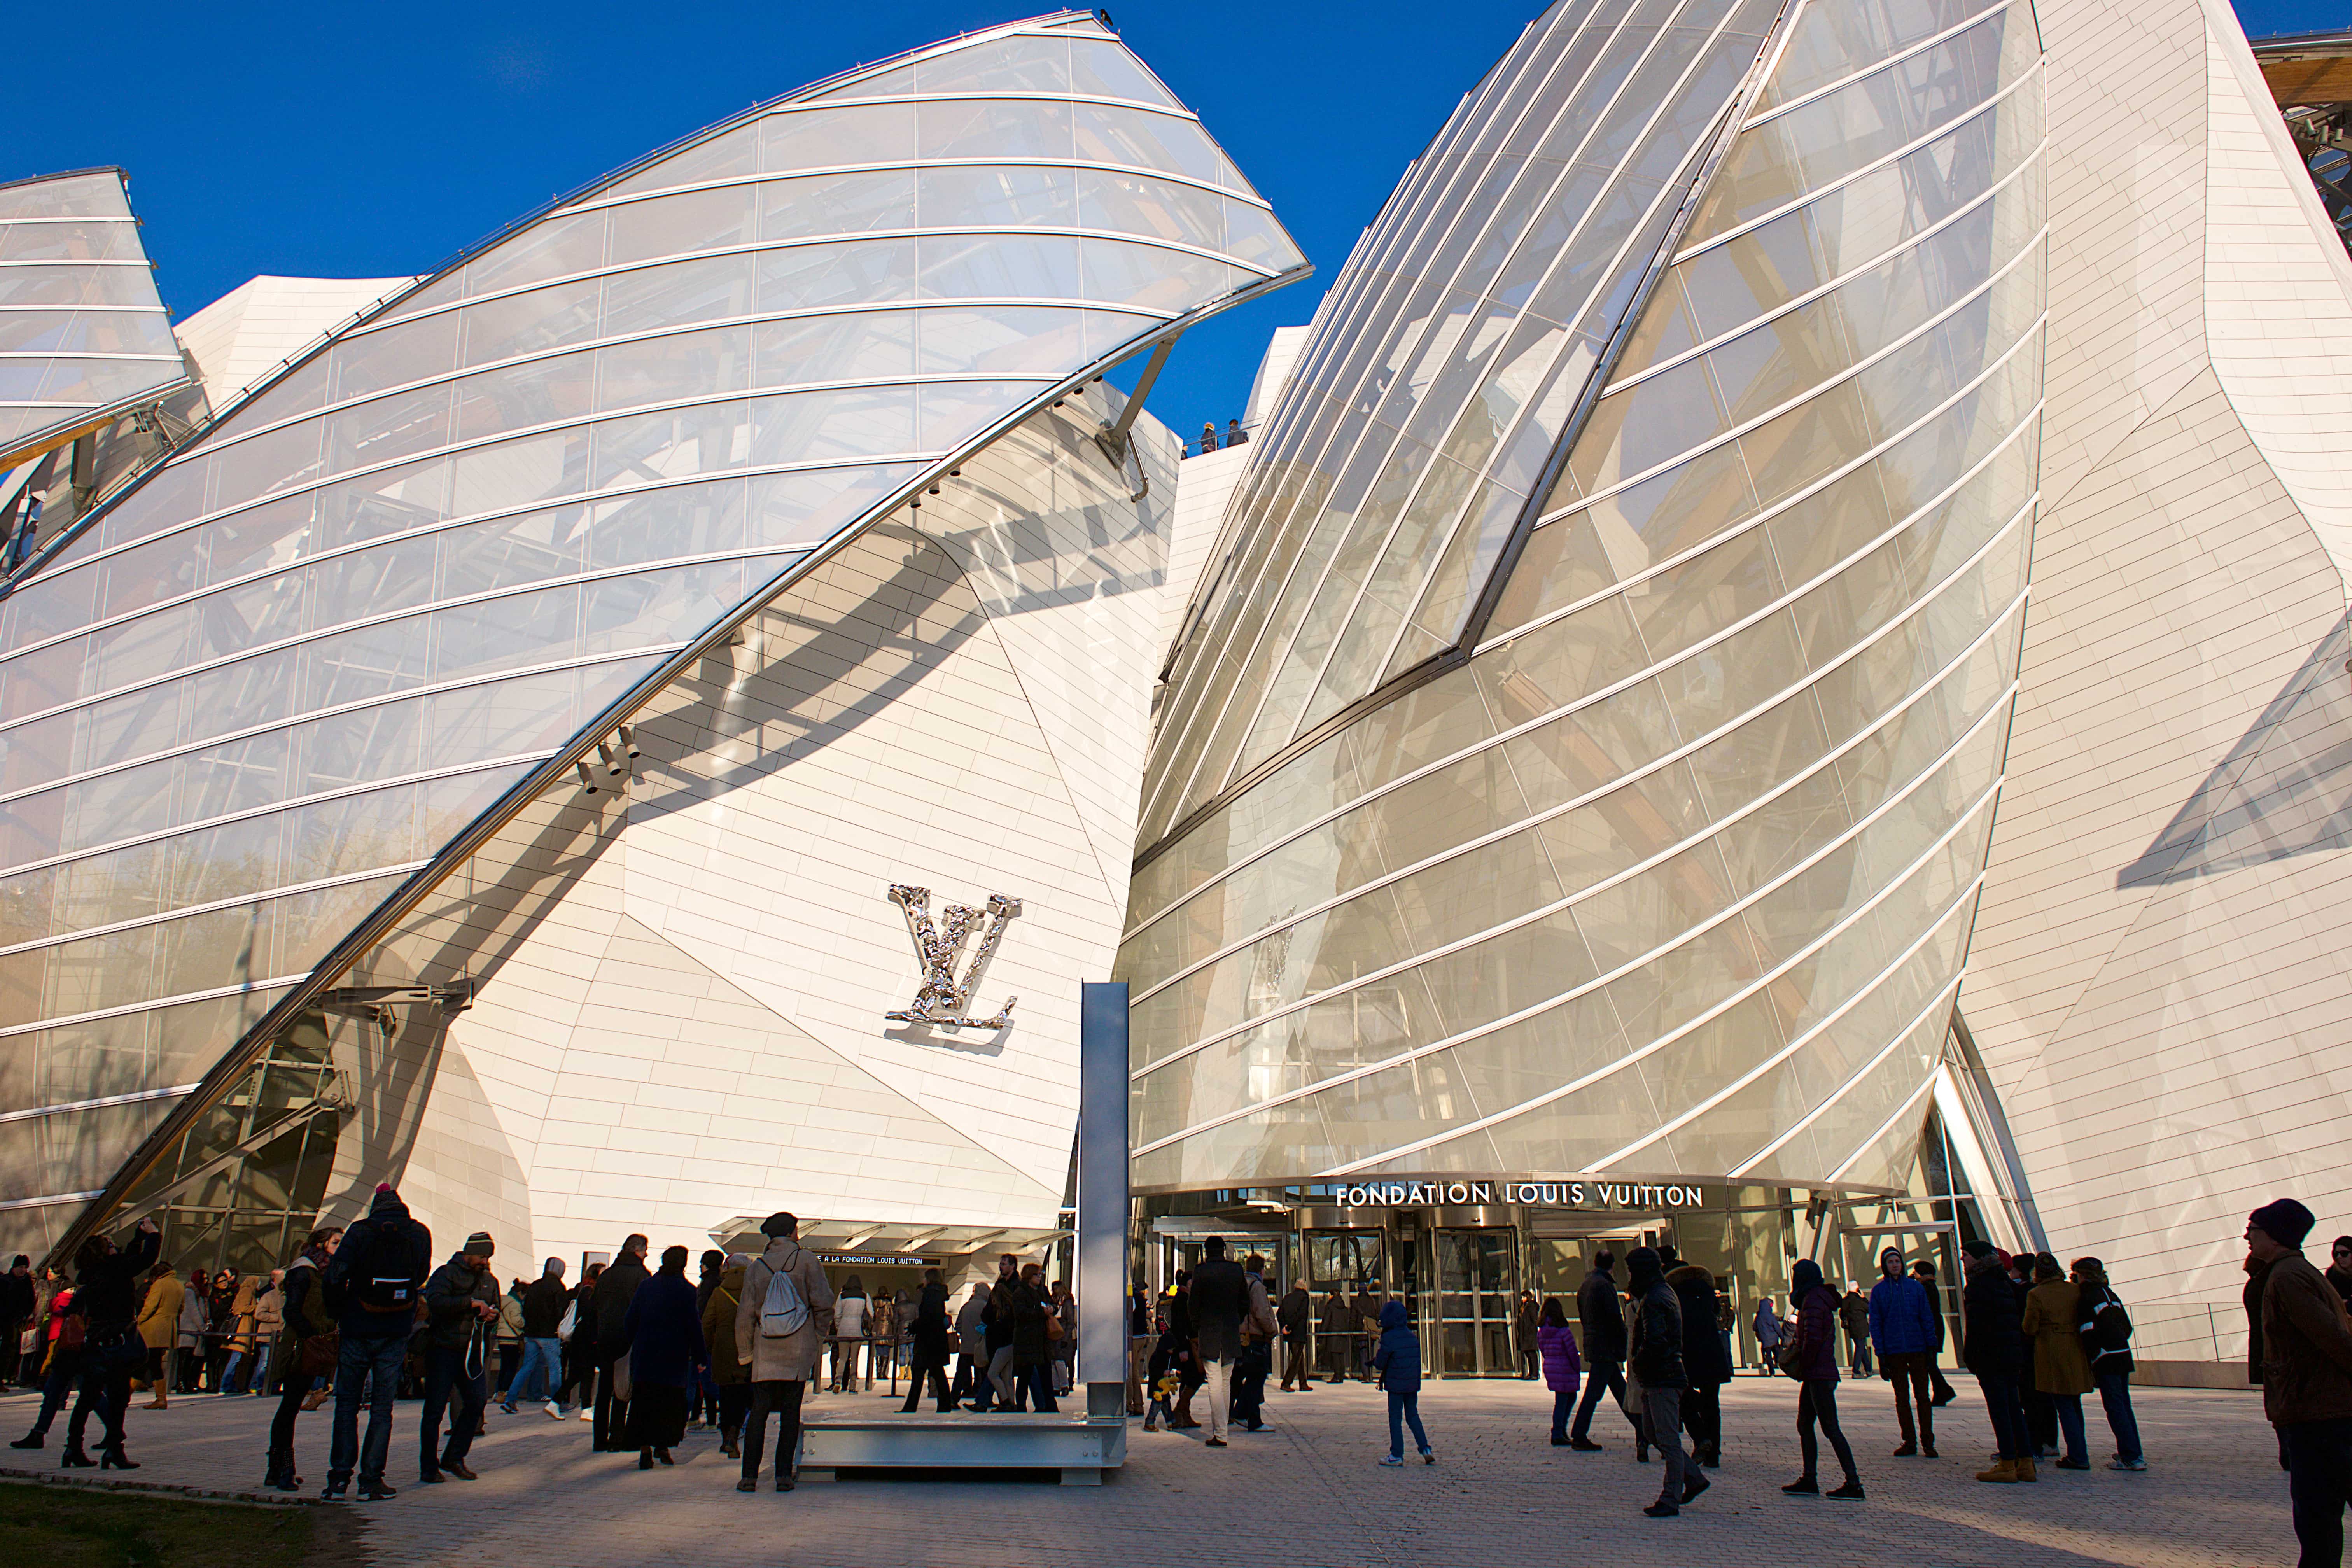 How Strategic Debt Helped LVMH Become One Of The World’s Most Valuable Companies - Enness Global